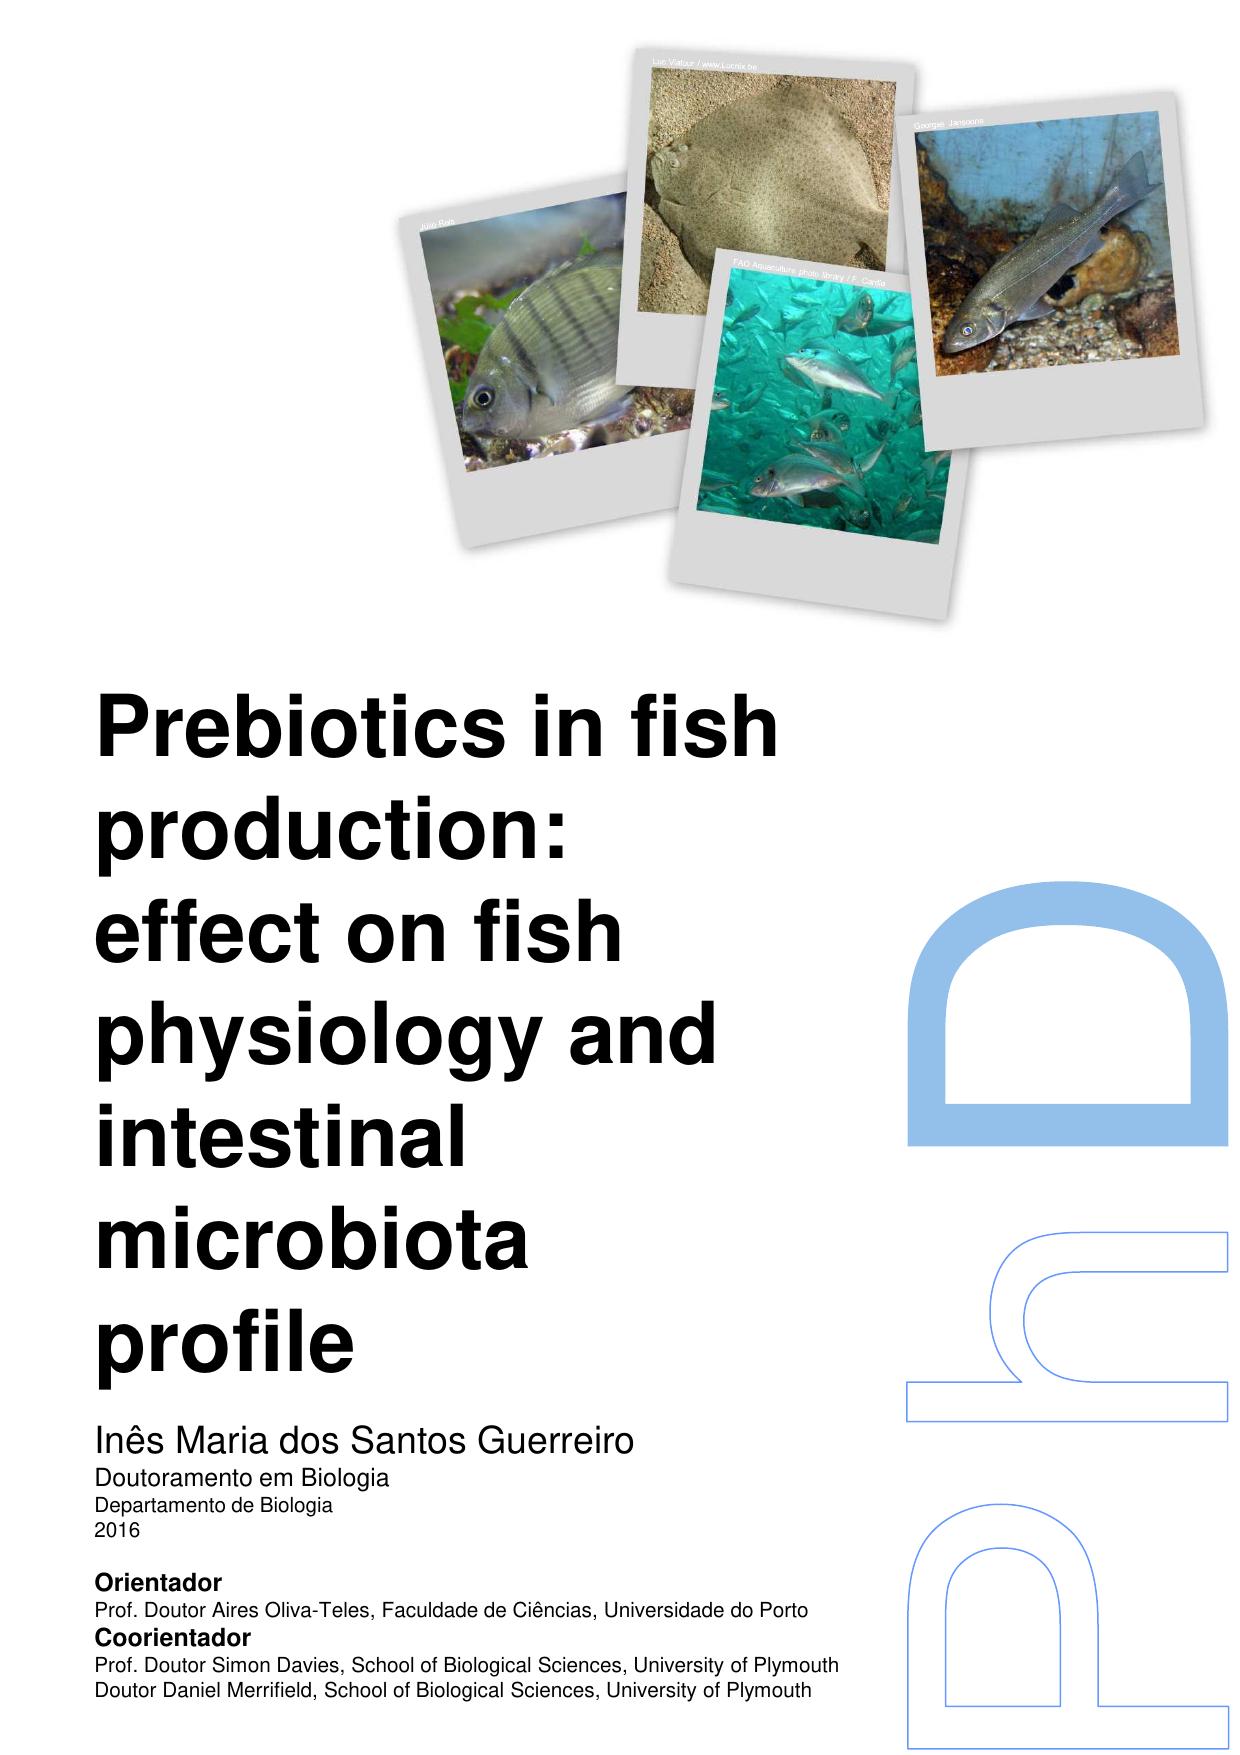 Prebiotics in fish production  effect on fish physiology and intestinal microbiota profile 2016